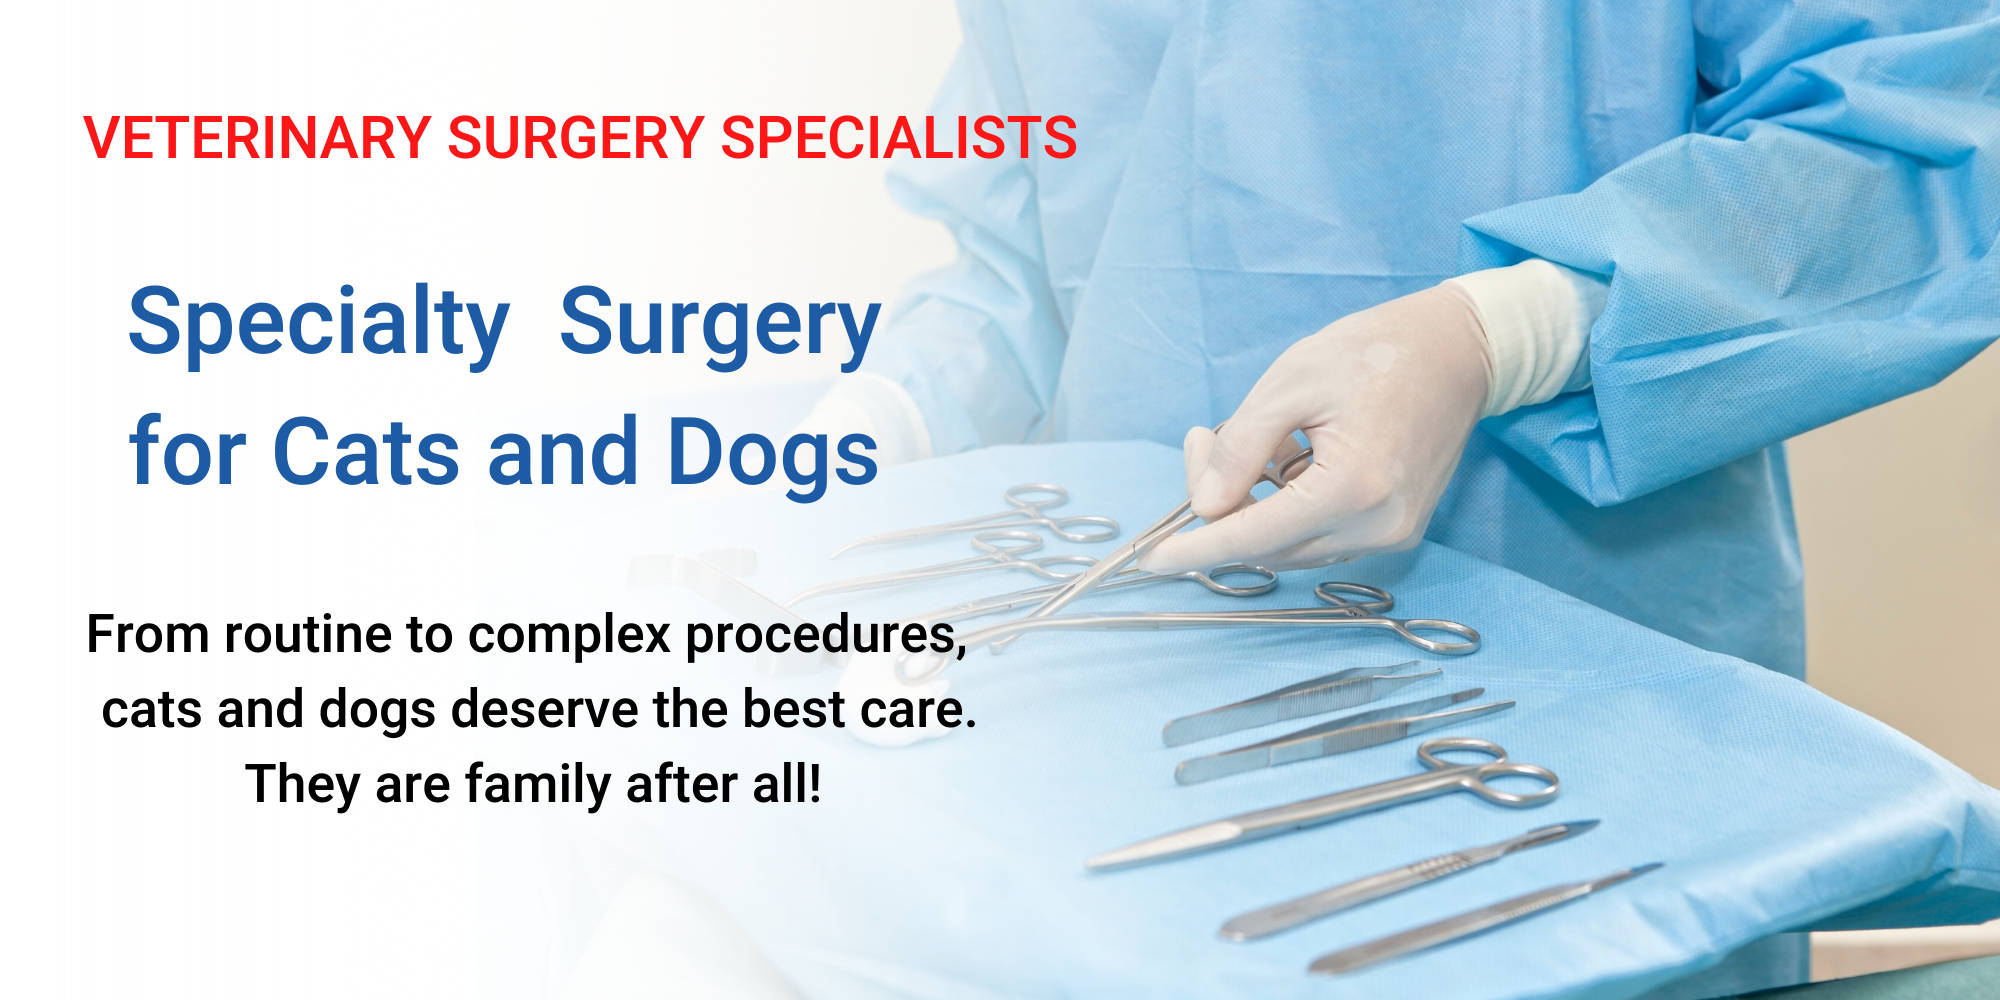 Veterinary Surgery Speicalists (1800 × 924 px) (2000 × 1000 px) (1)